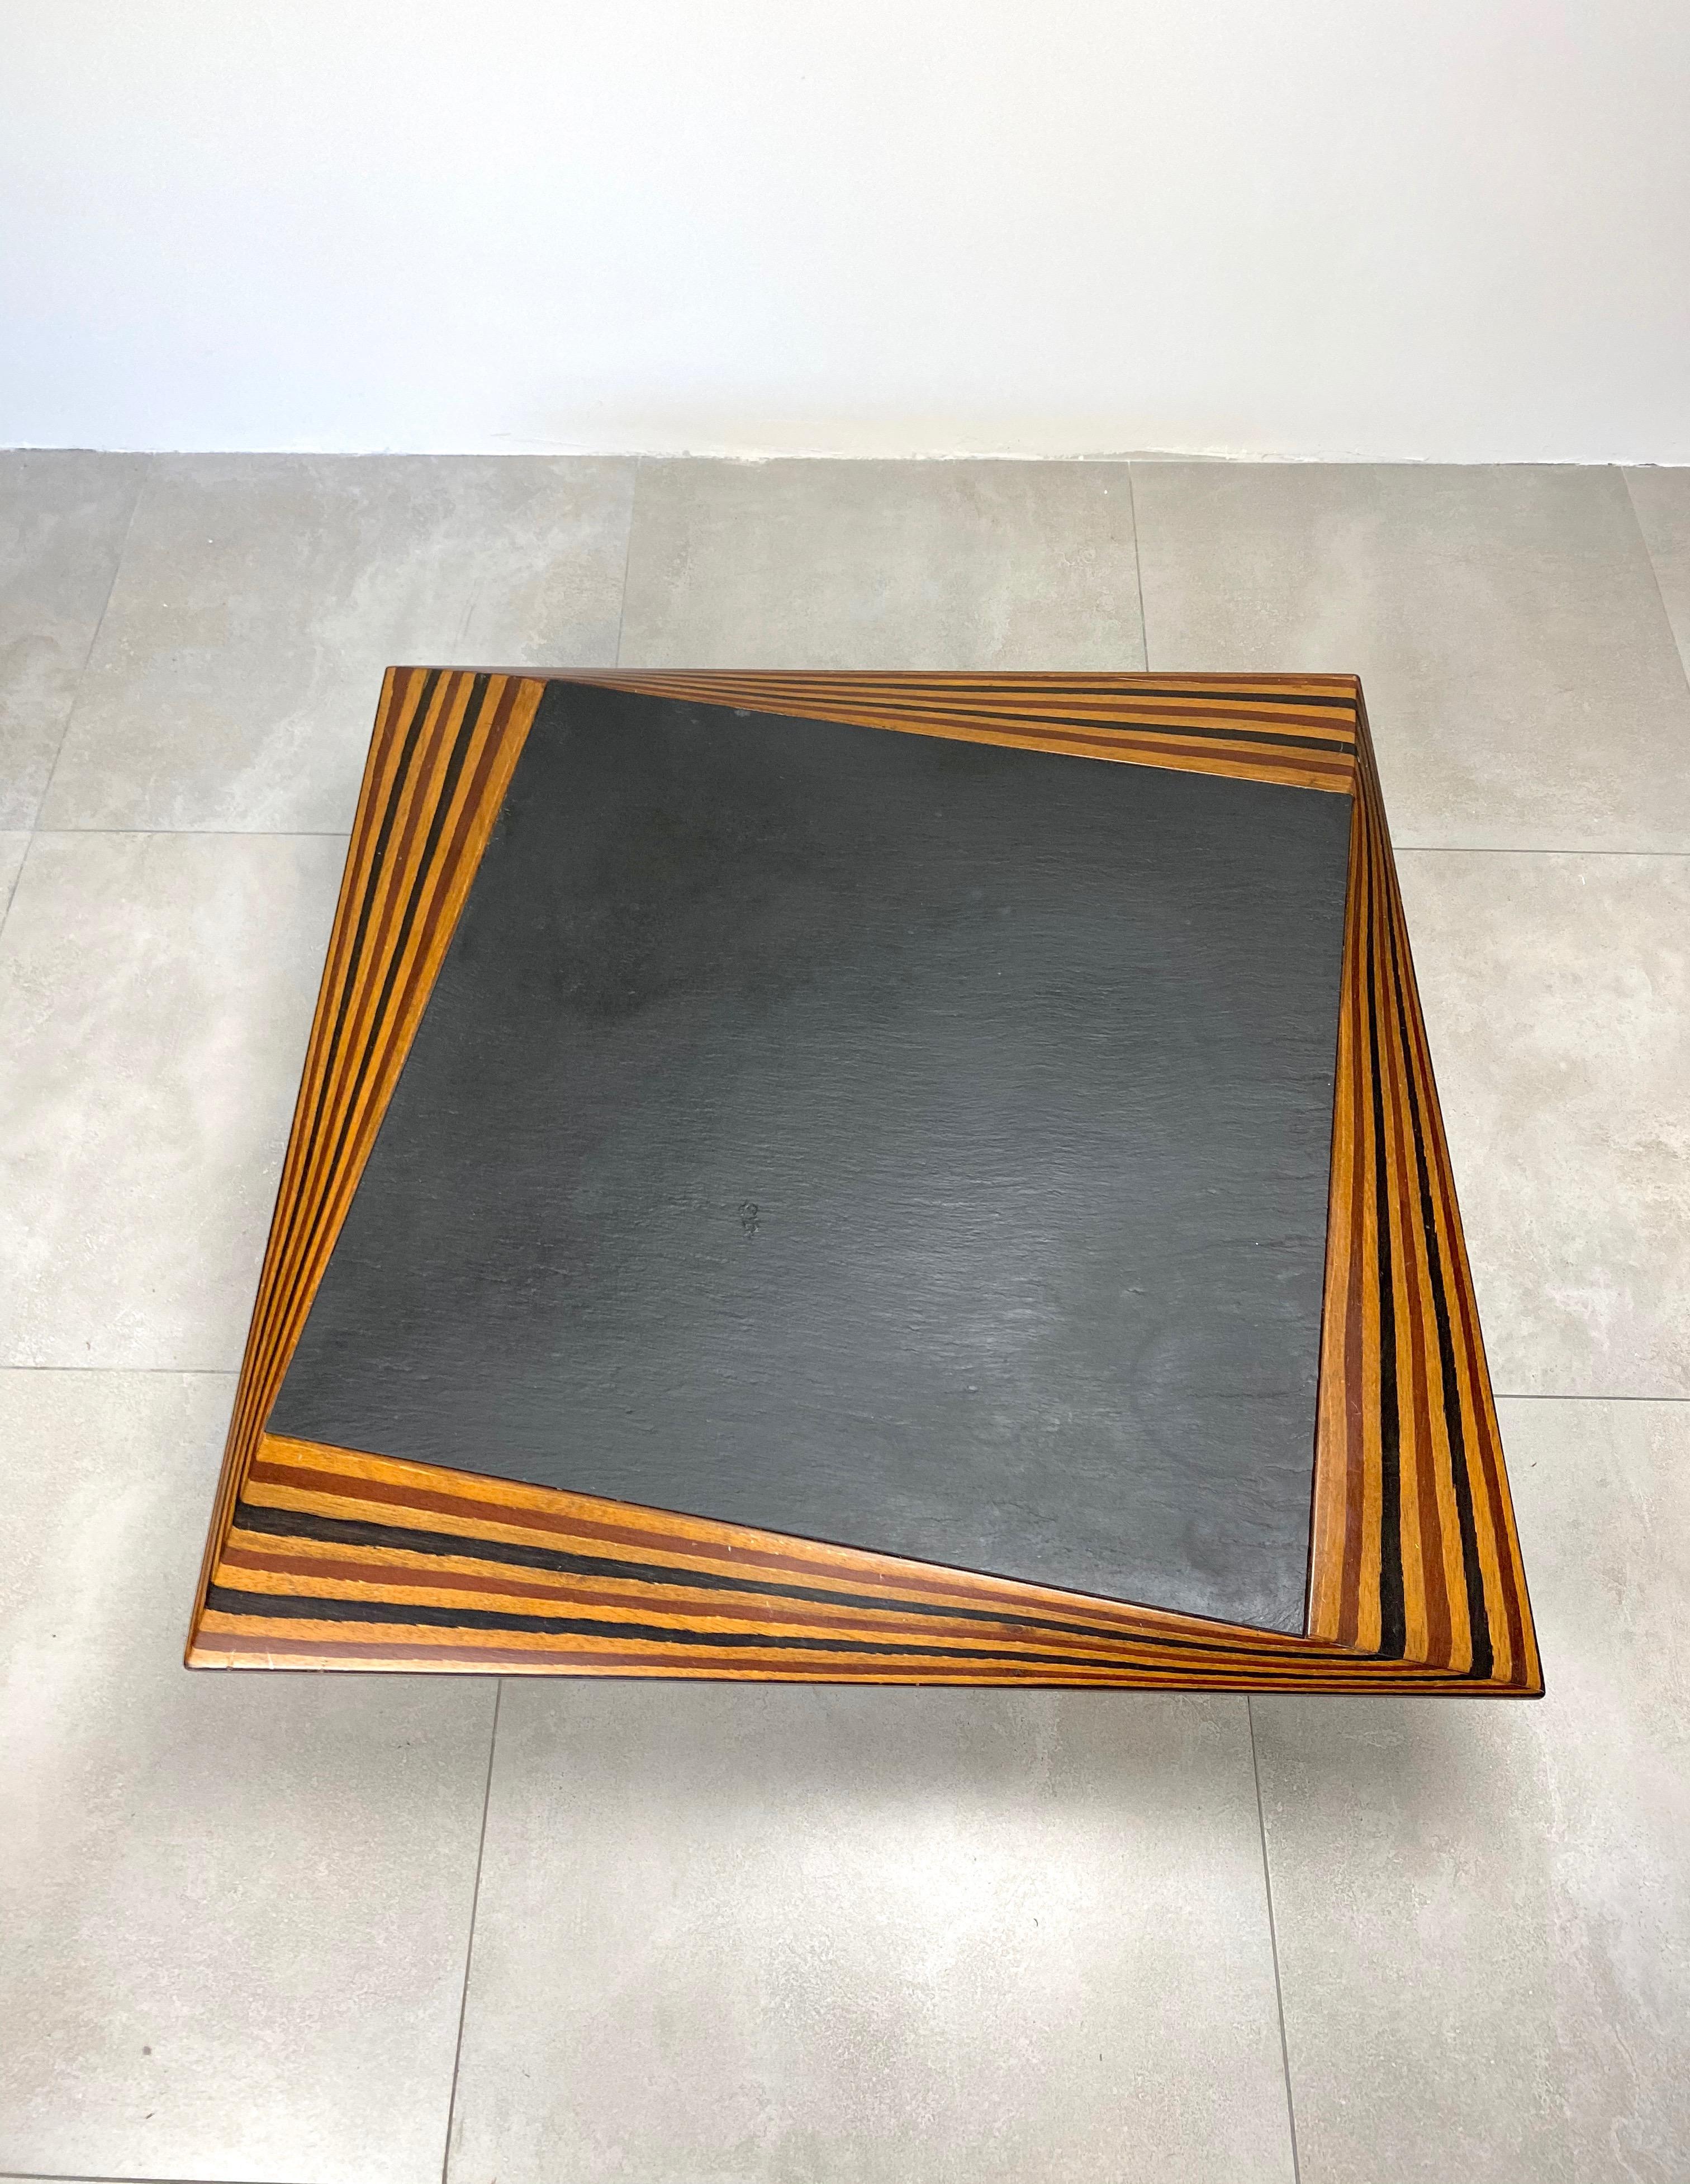 Slate and Wood Coffee Low Table in Tobia Scarpa Style, Italy, 1980s For Sale 1